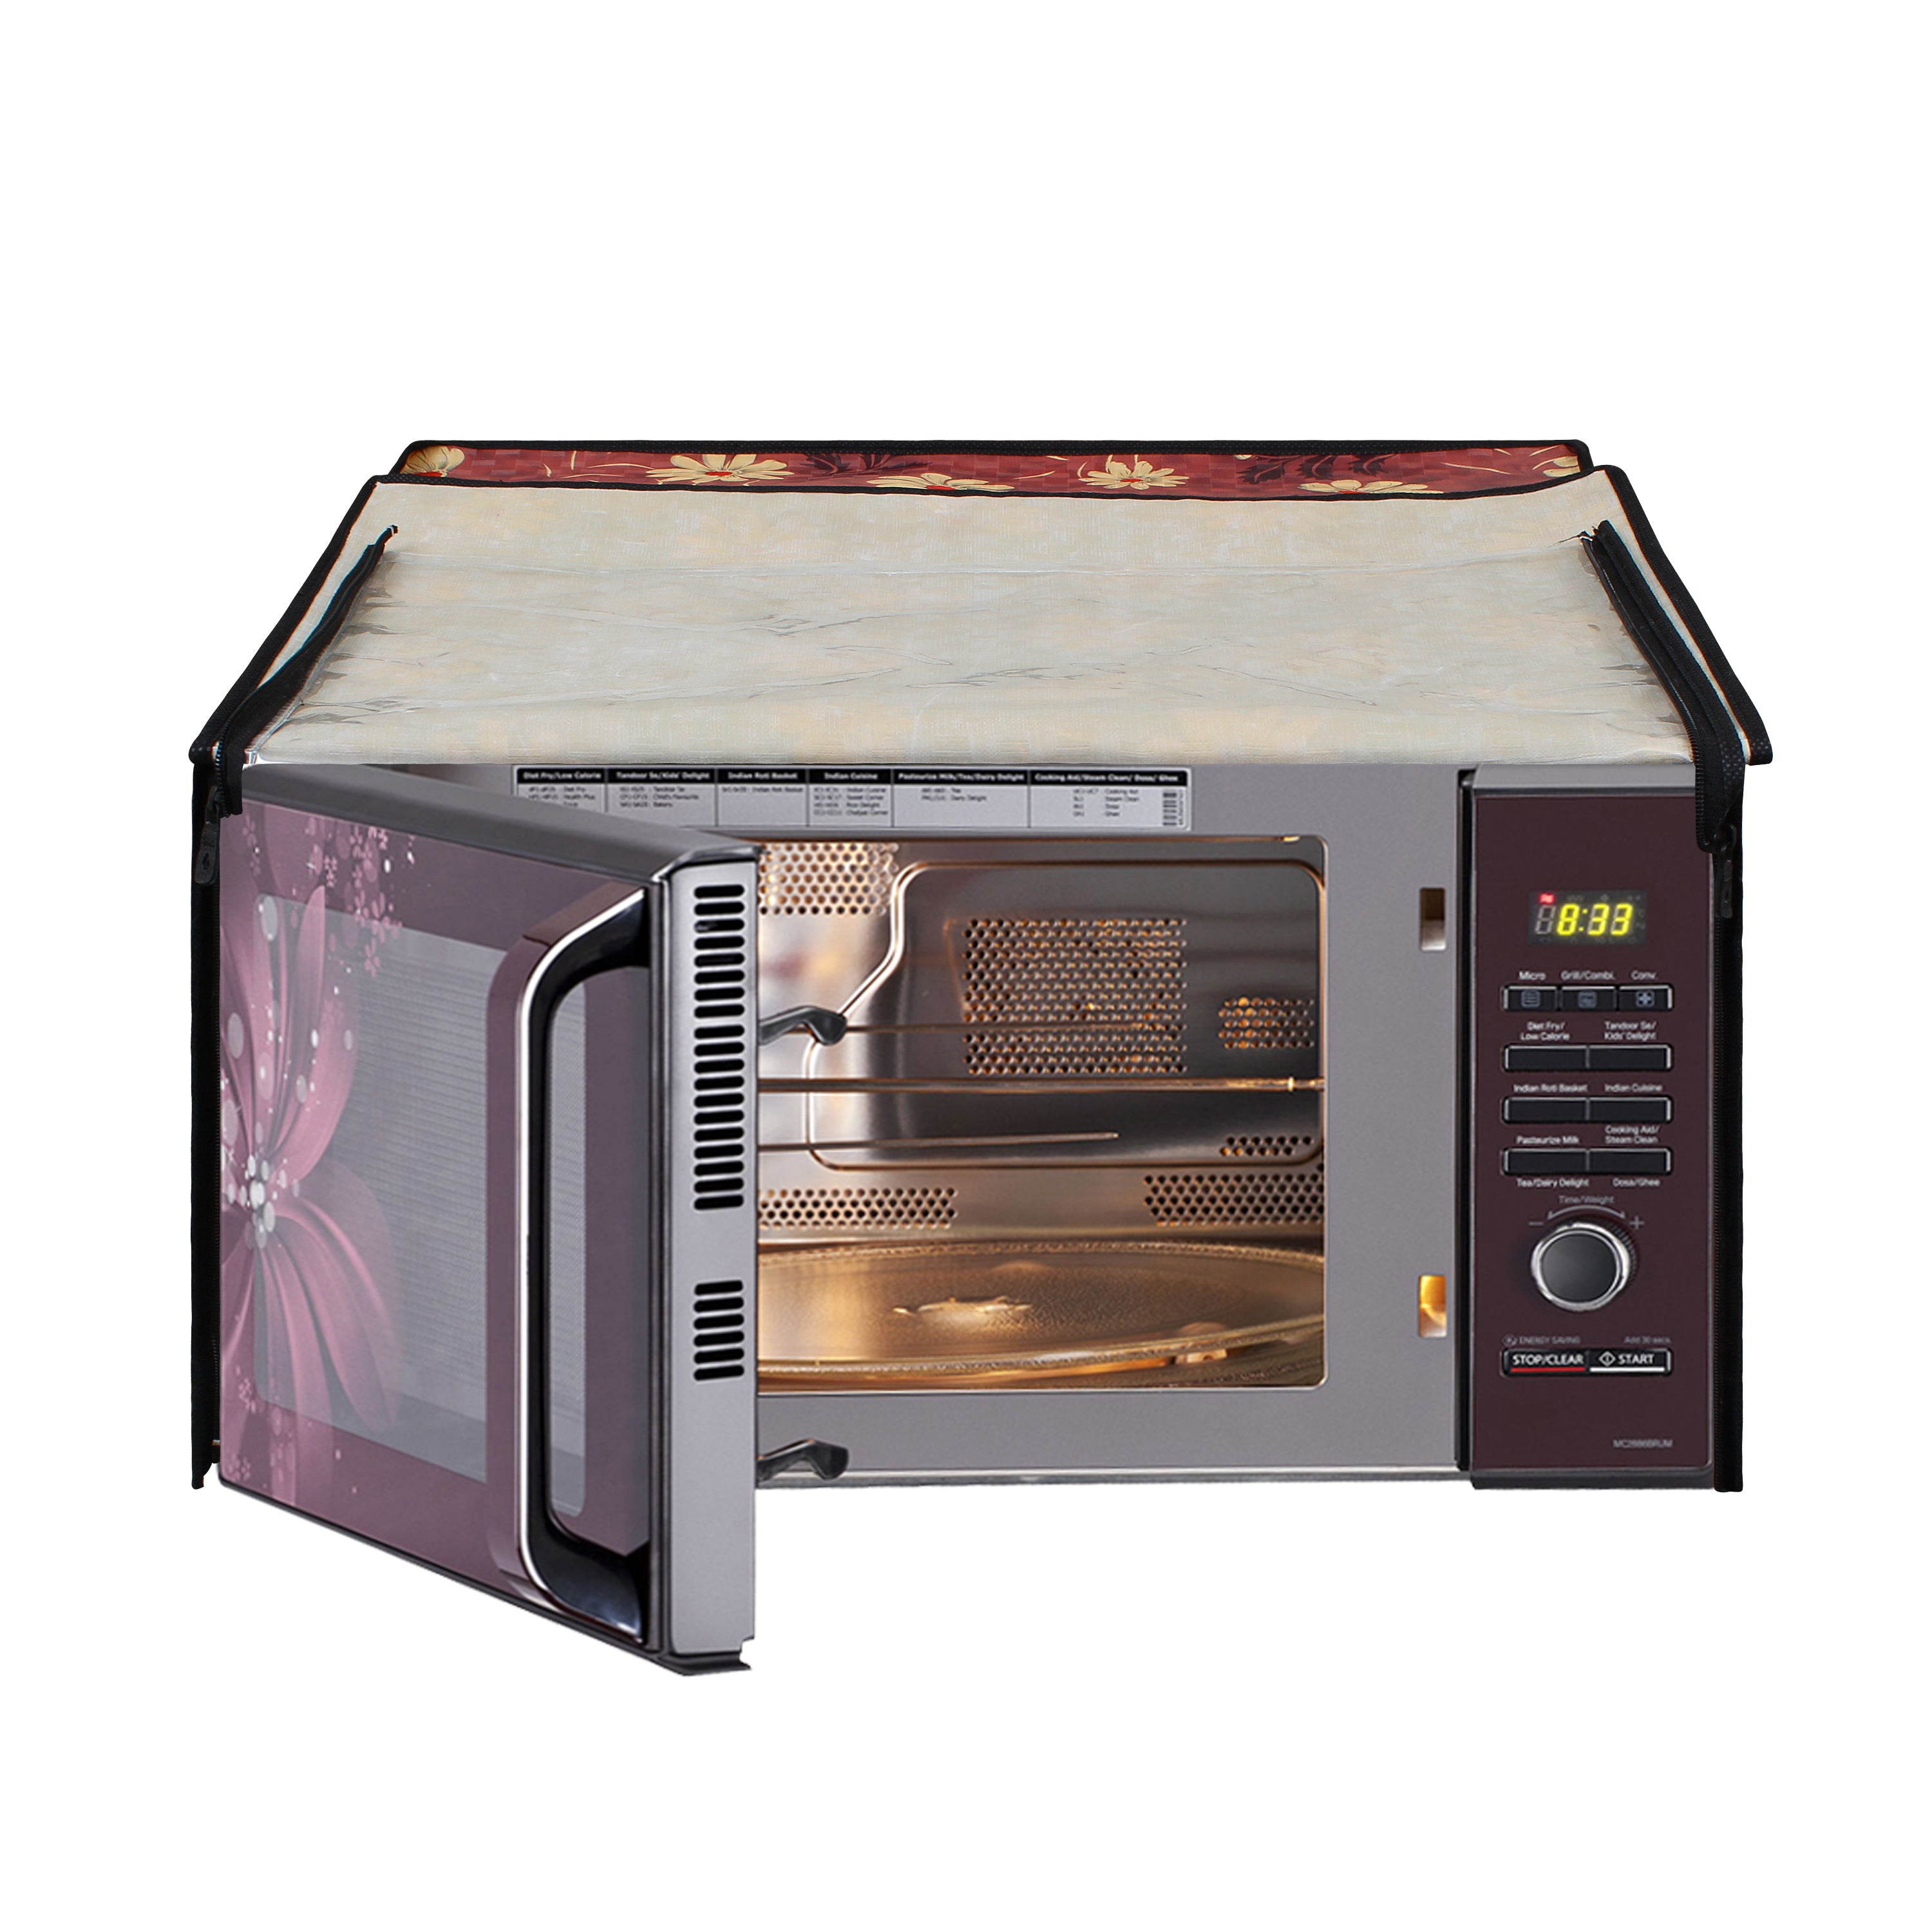 Microwave Oven Cover With Adjustable Front Zipper, SA18 - Dream Care Furnishings Private Limited